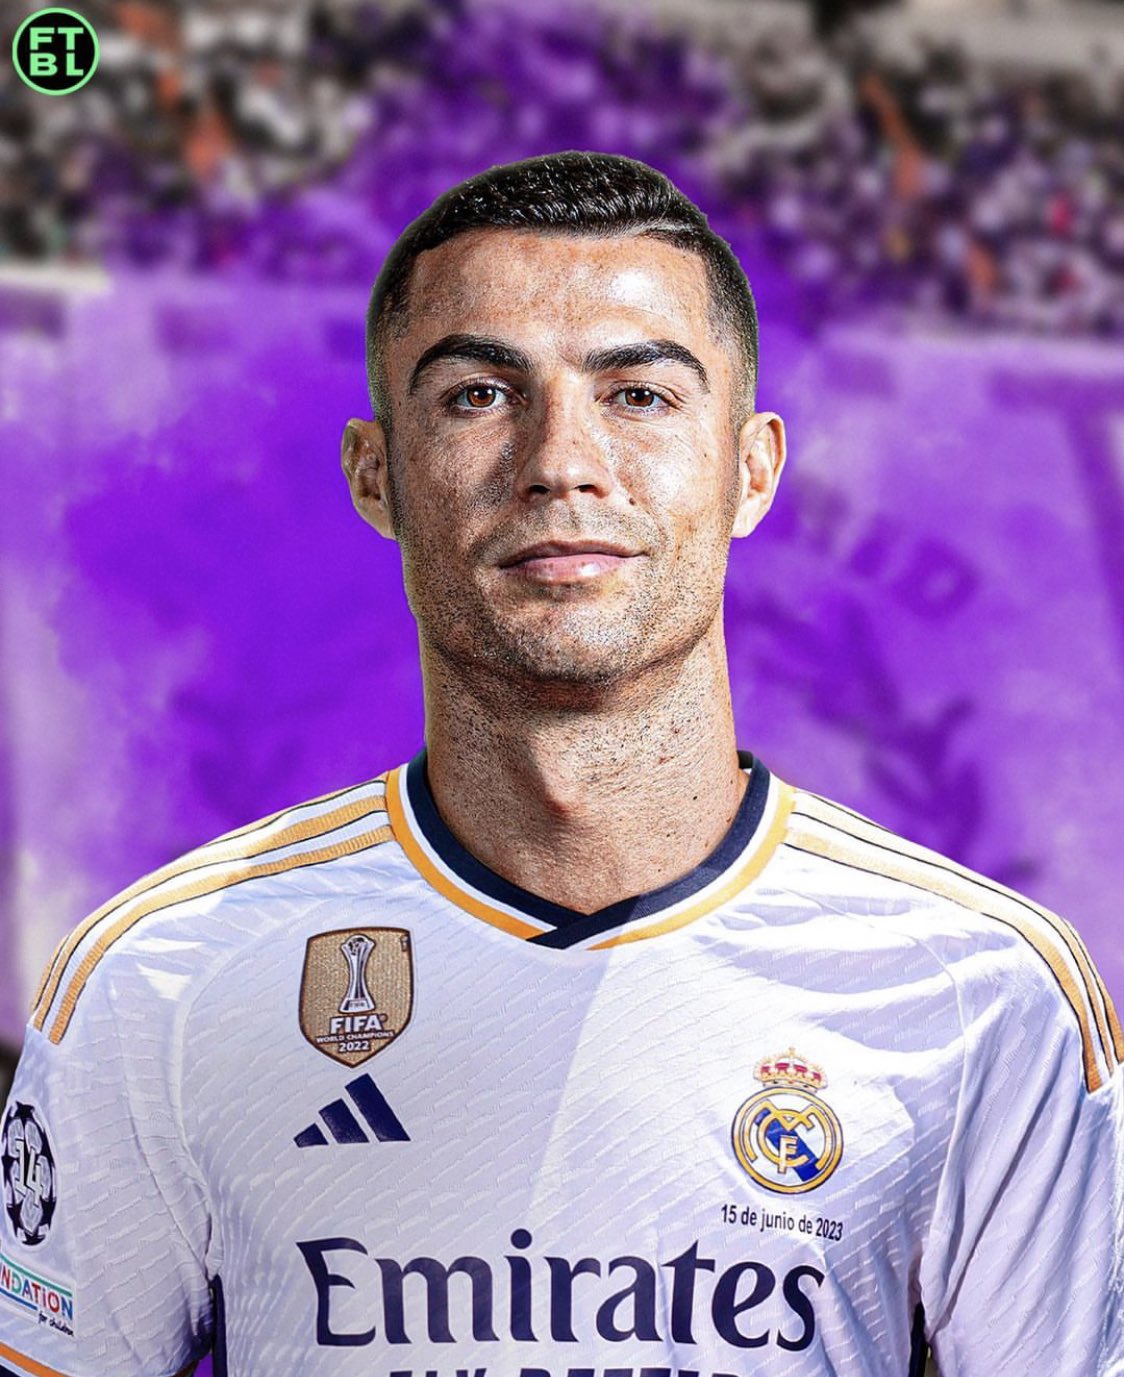 What would Cristiano Ronaldo look like in different clubs' kits?